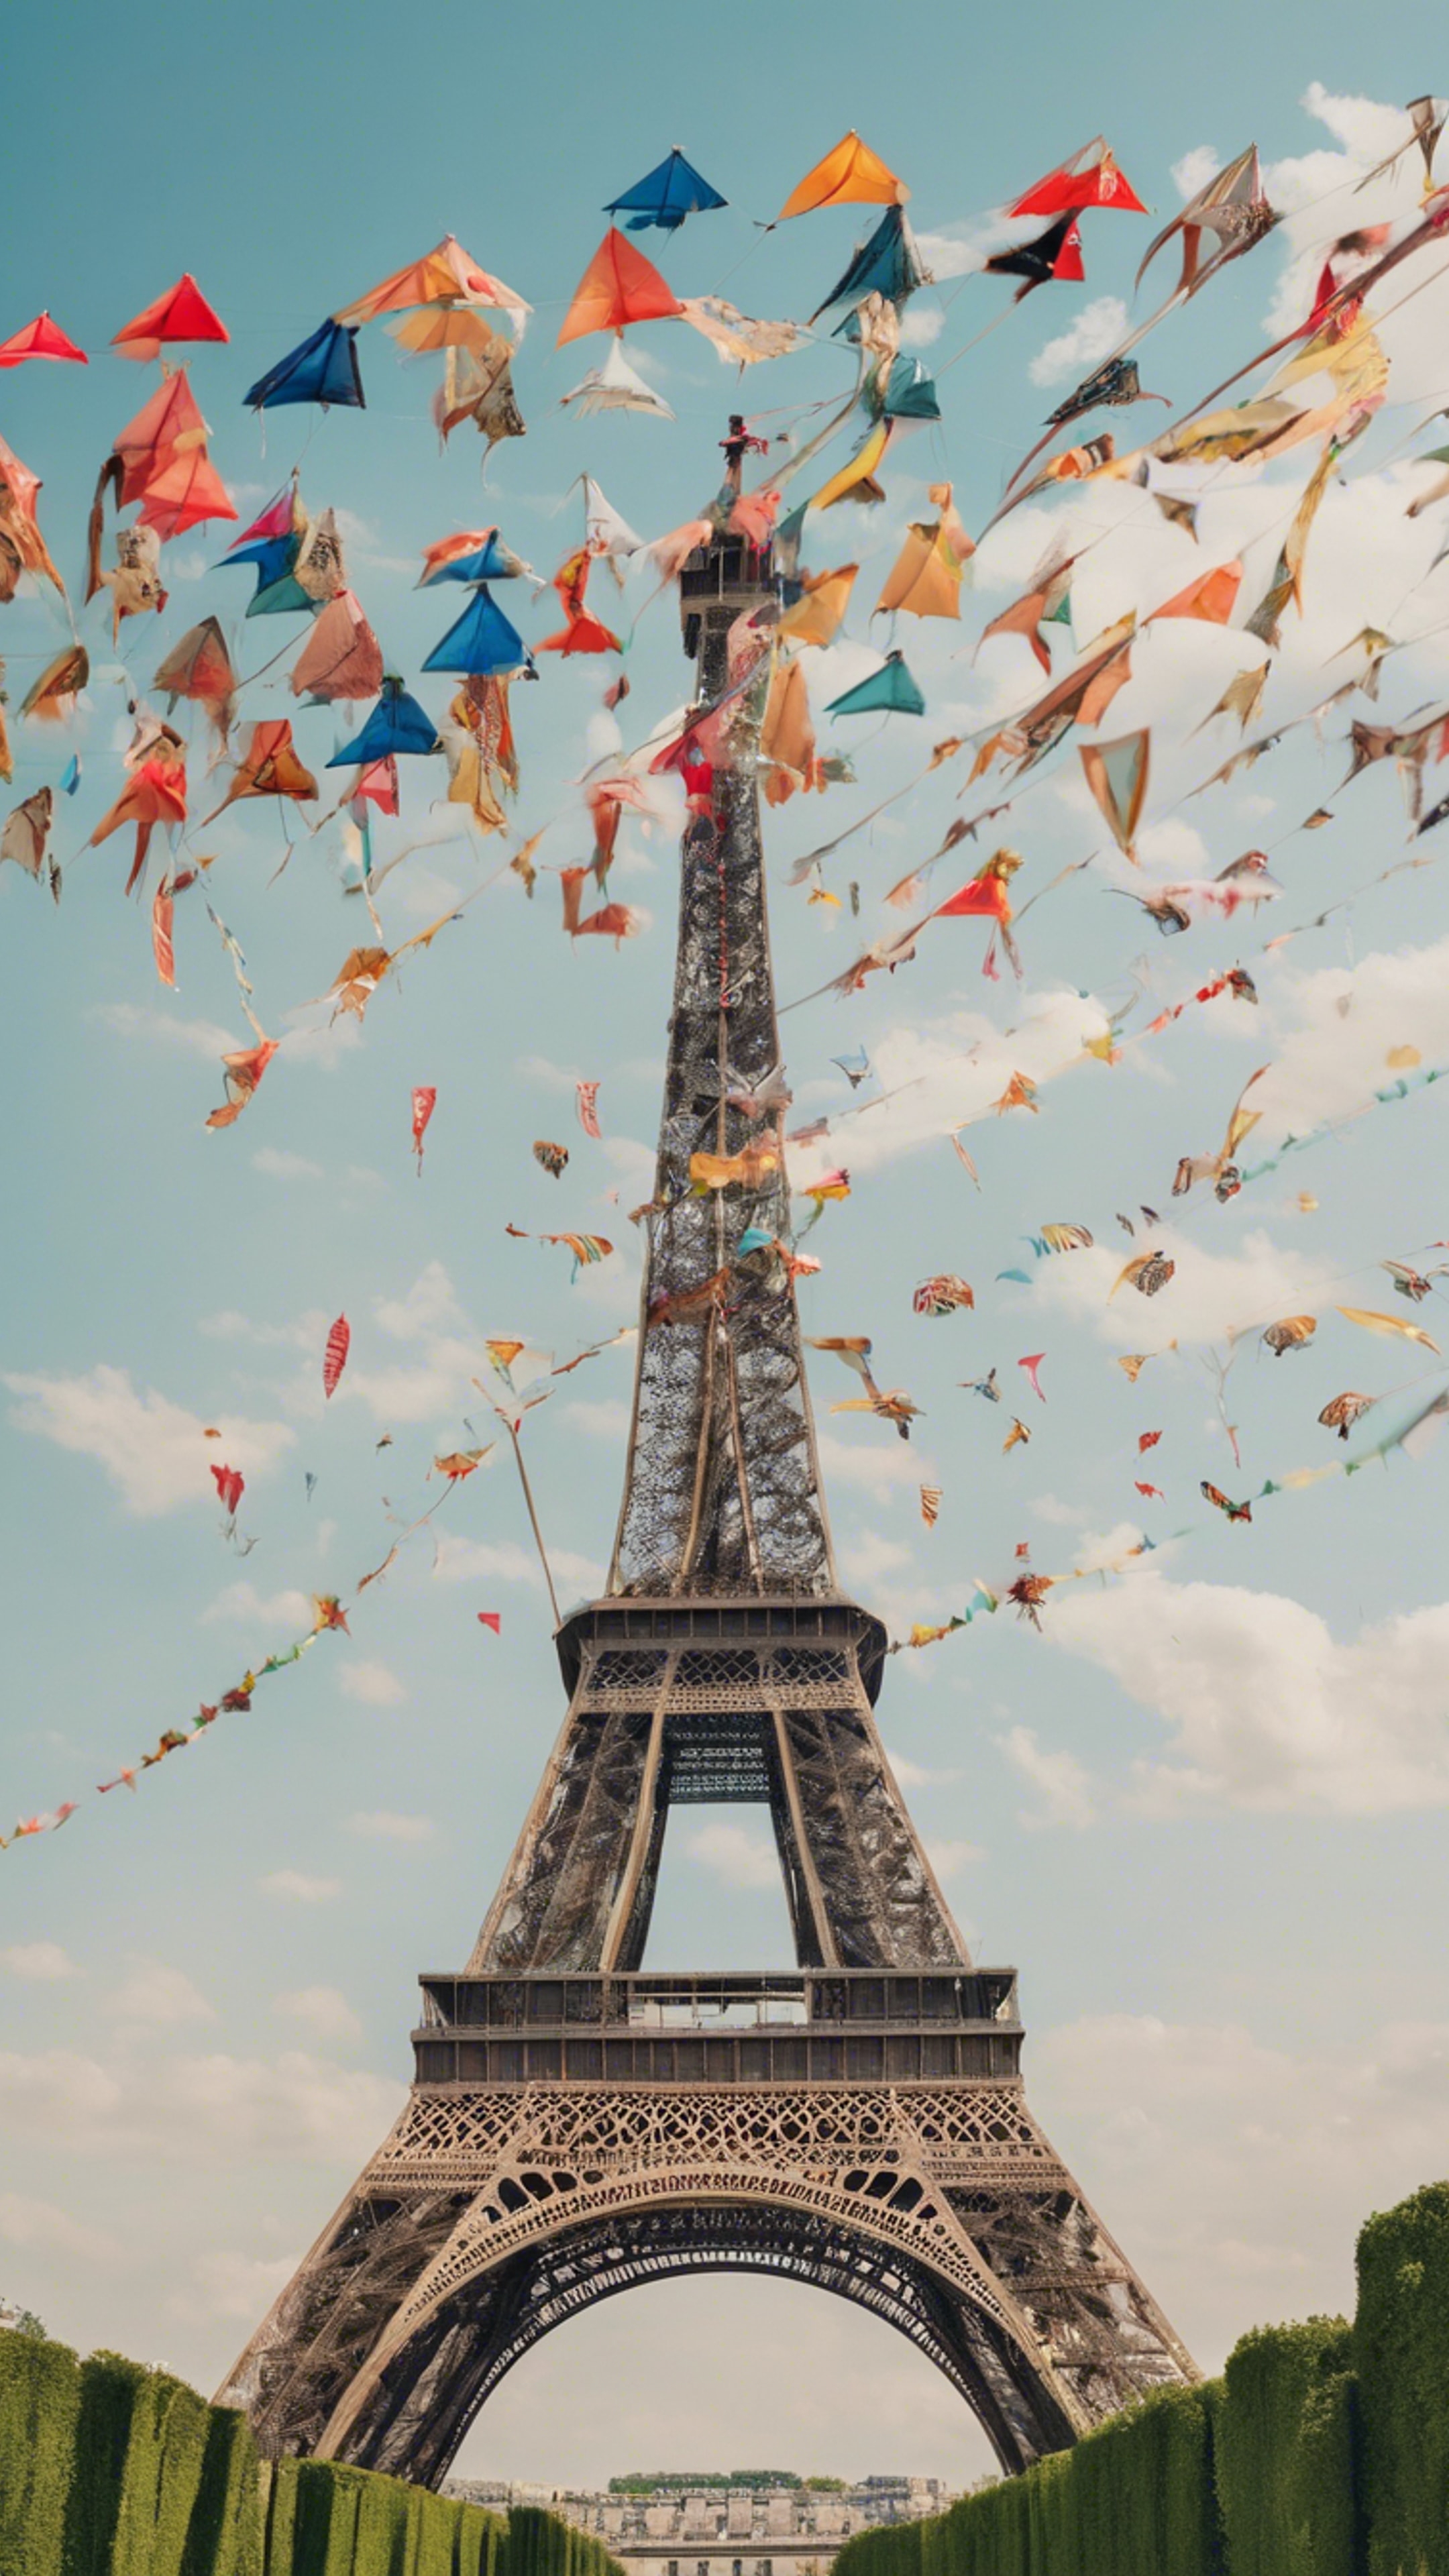 Numerous colorful kites flying around the Eiffel Tower on a breezy summer day. Wallpaper[13c5a5af918a46f7995e]